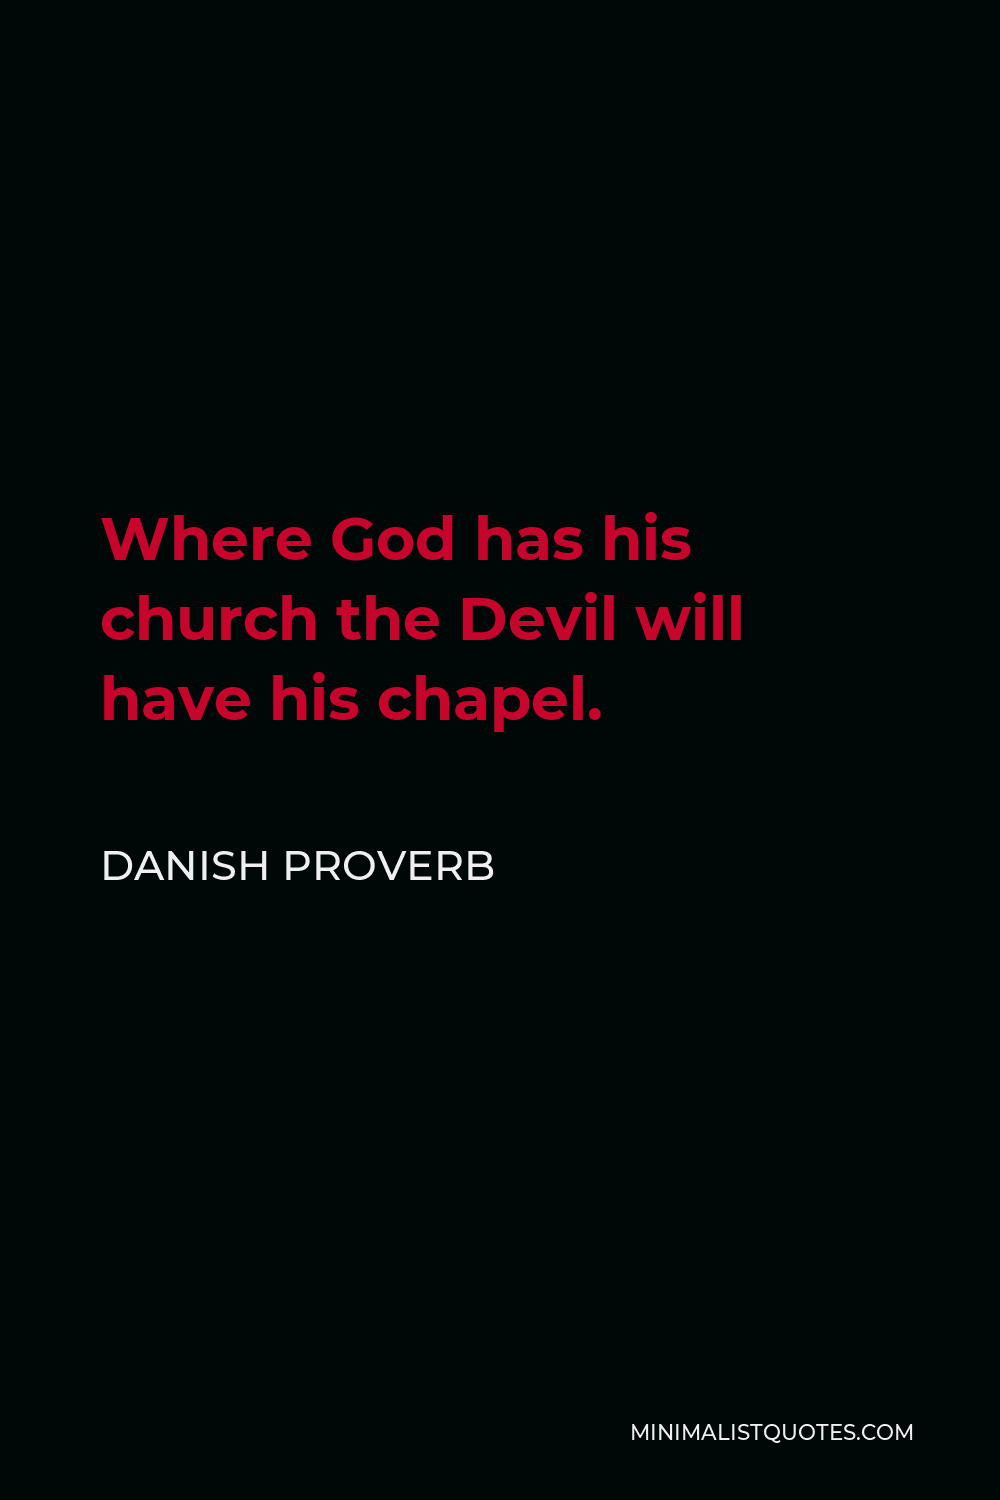 Danish Proverb Quote - Where God has his church the Devil will have his chapel.